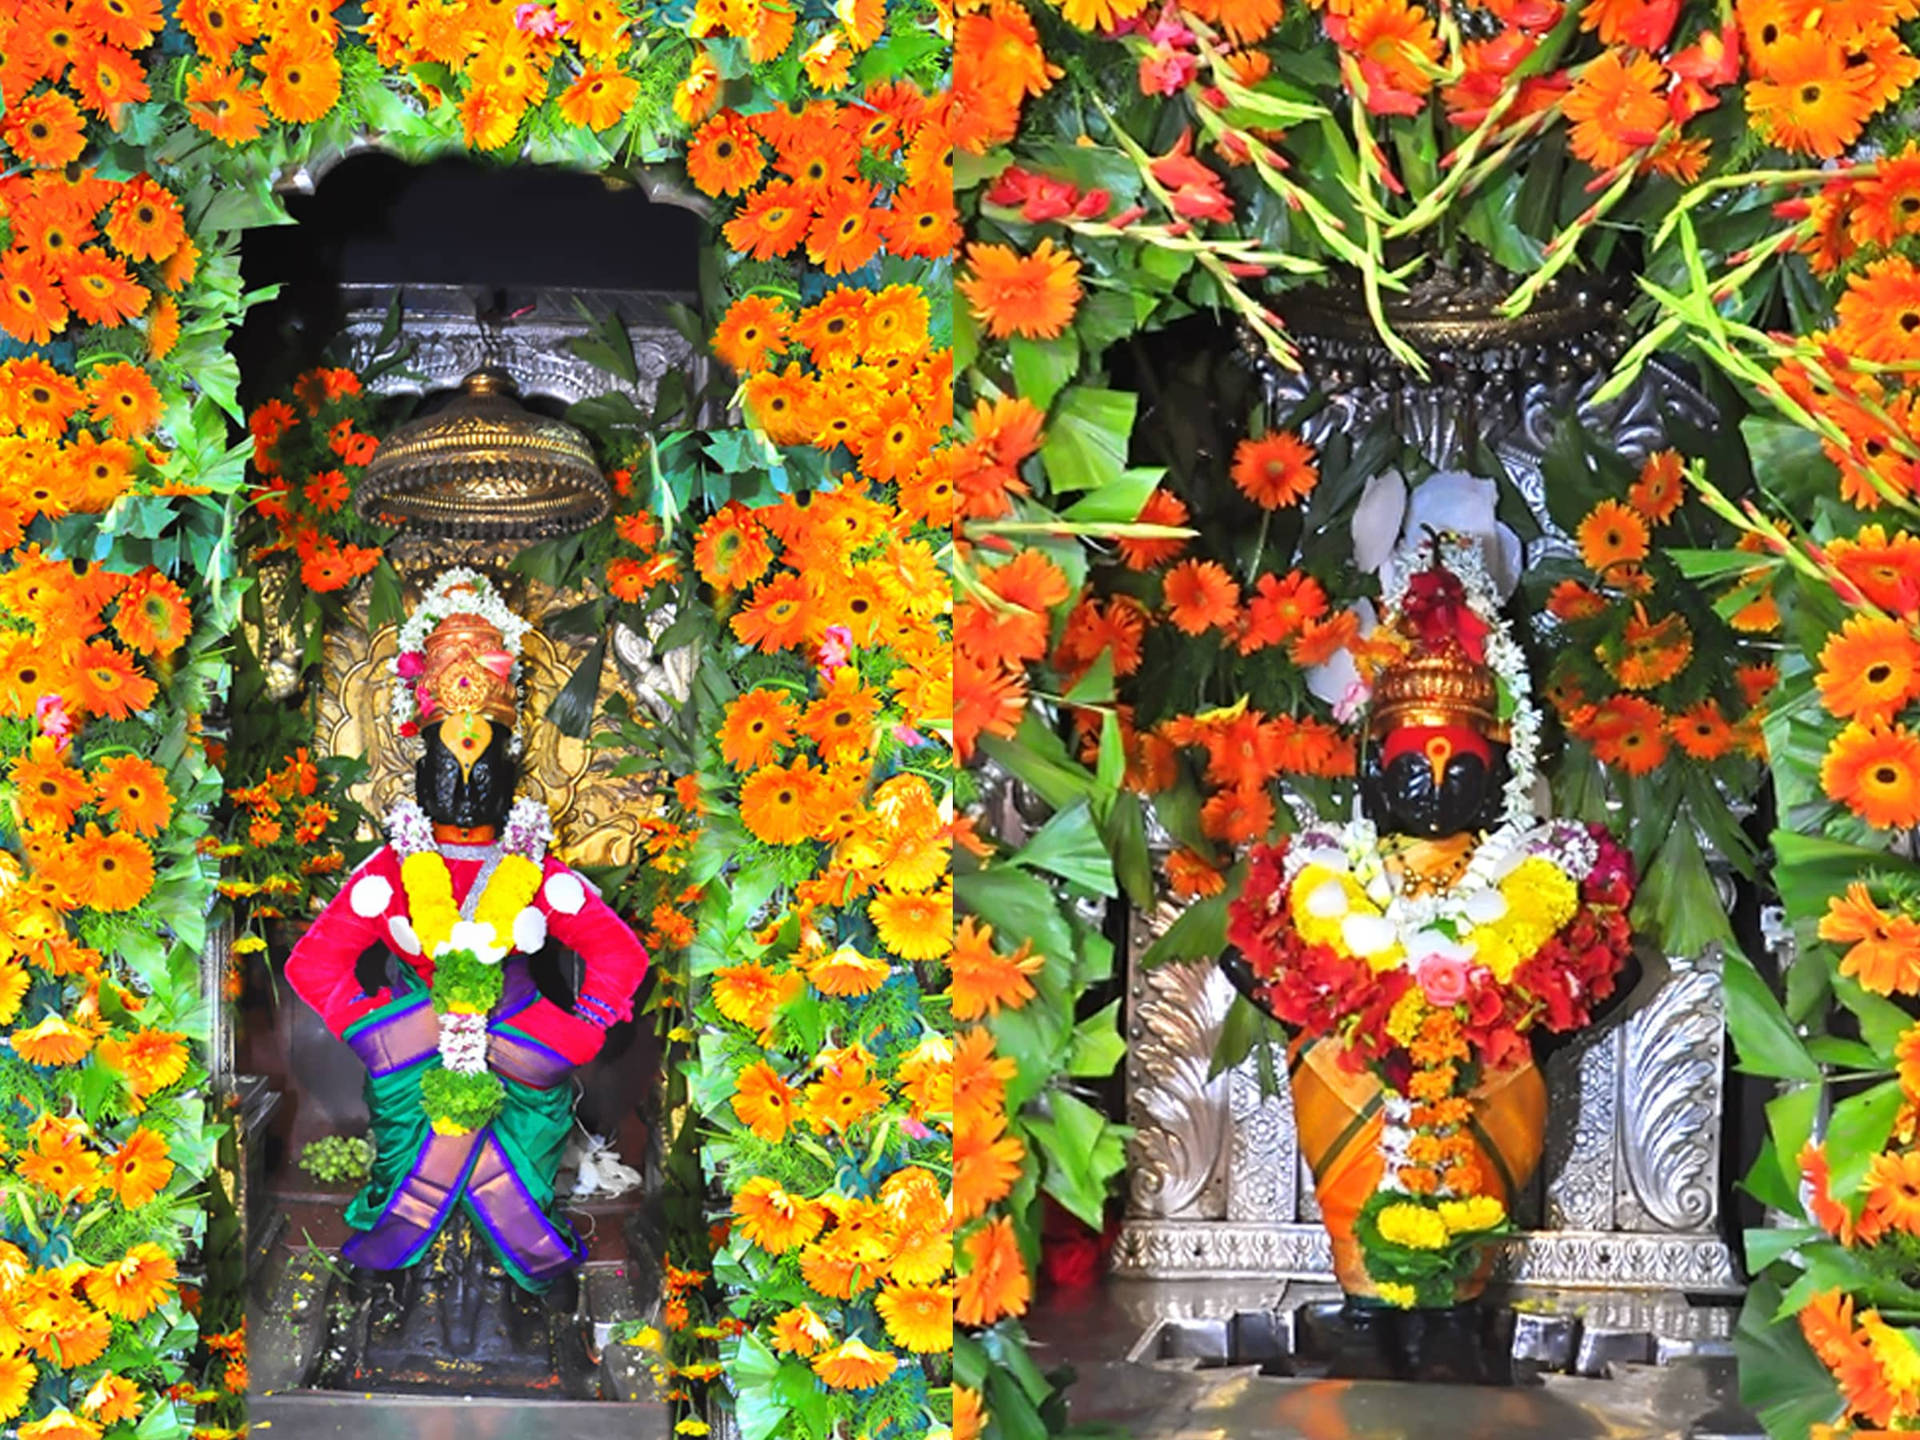 Two Lord Pandurang Statues At Temple Background